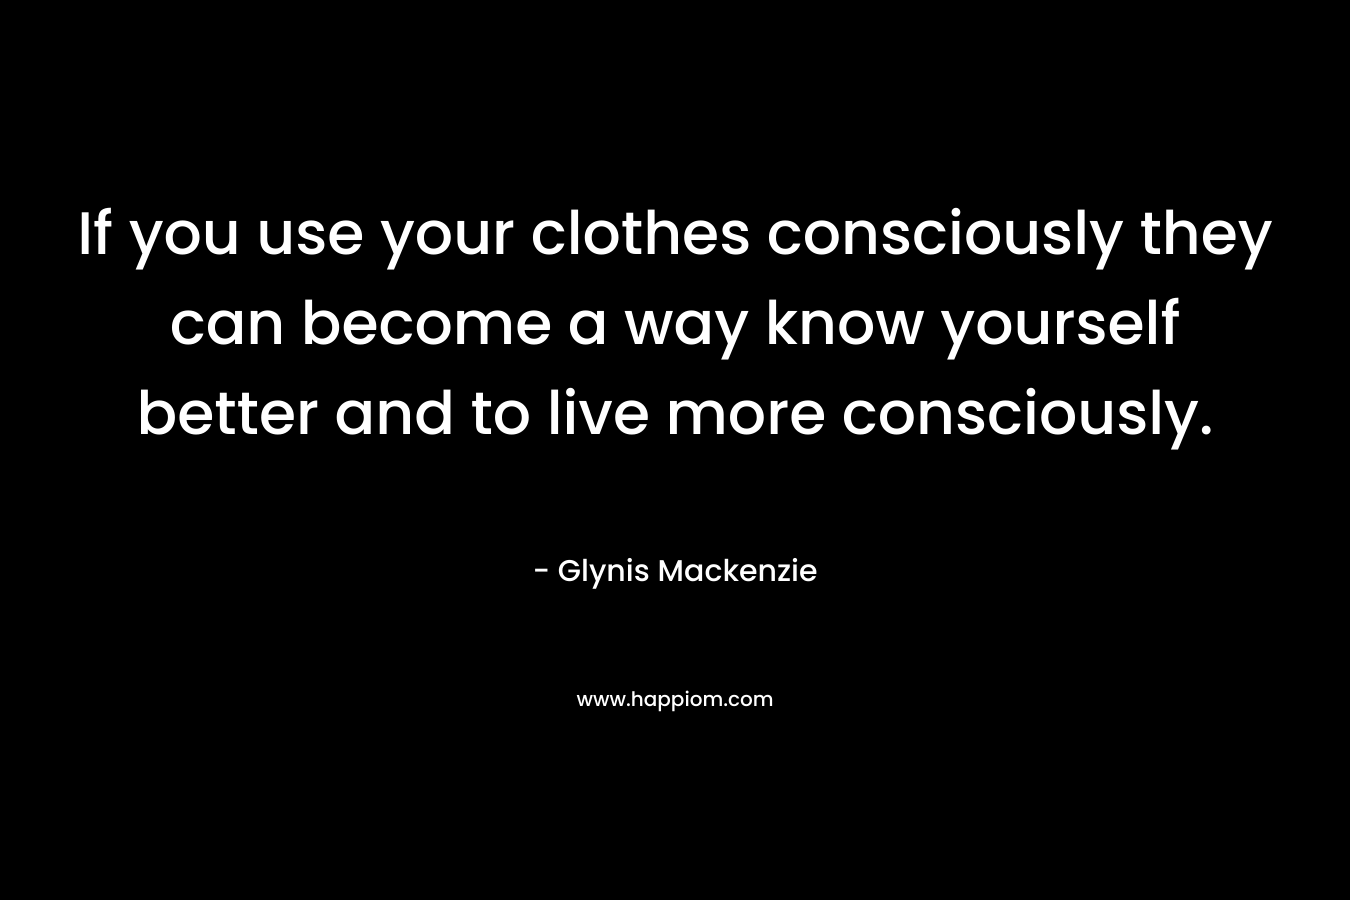 If you use your clothes consciously they can become a way know yourself better and to live more consciously.